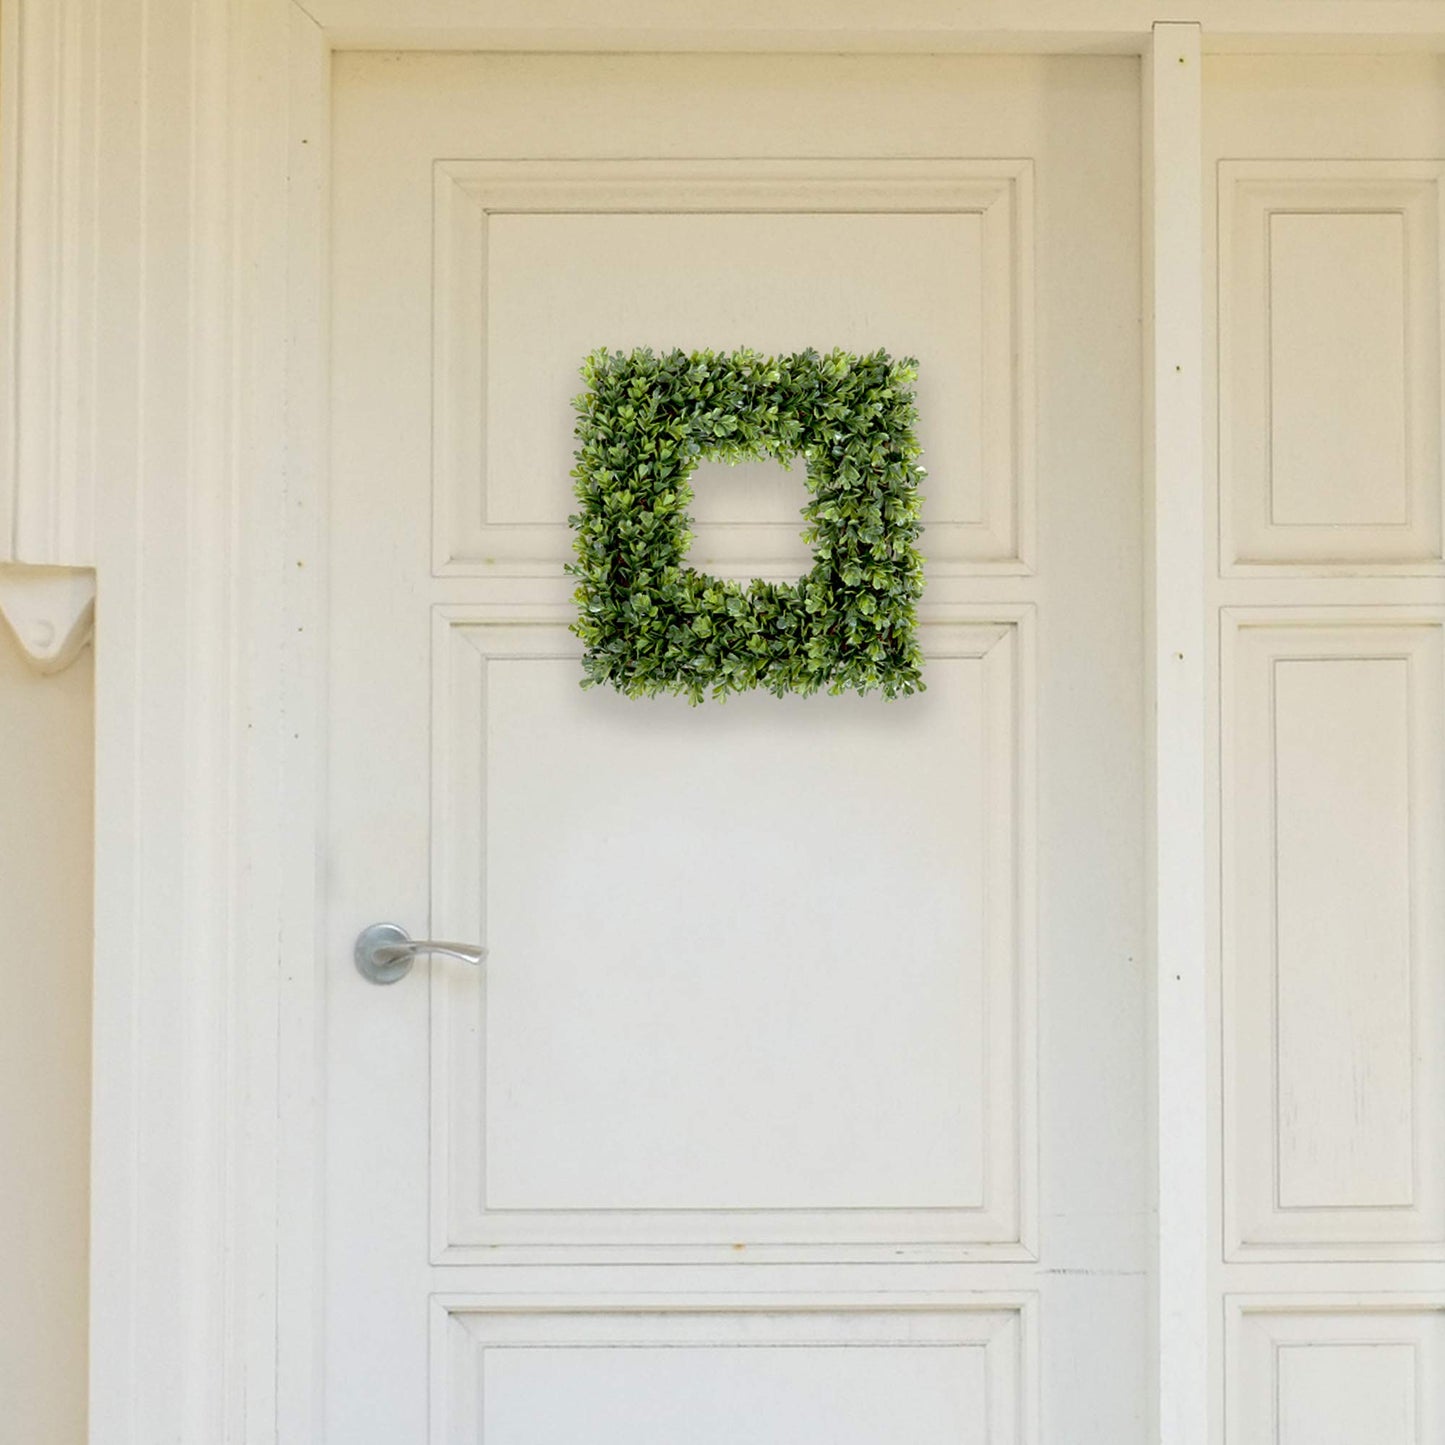 Pure Garden Boxwood, Artificial Wreath For The Front Door, Home Décor, Uv Resistant – 16.5 Inches, Square, 16.5X3, Green